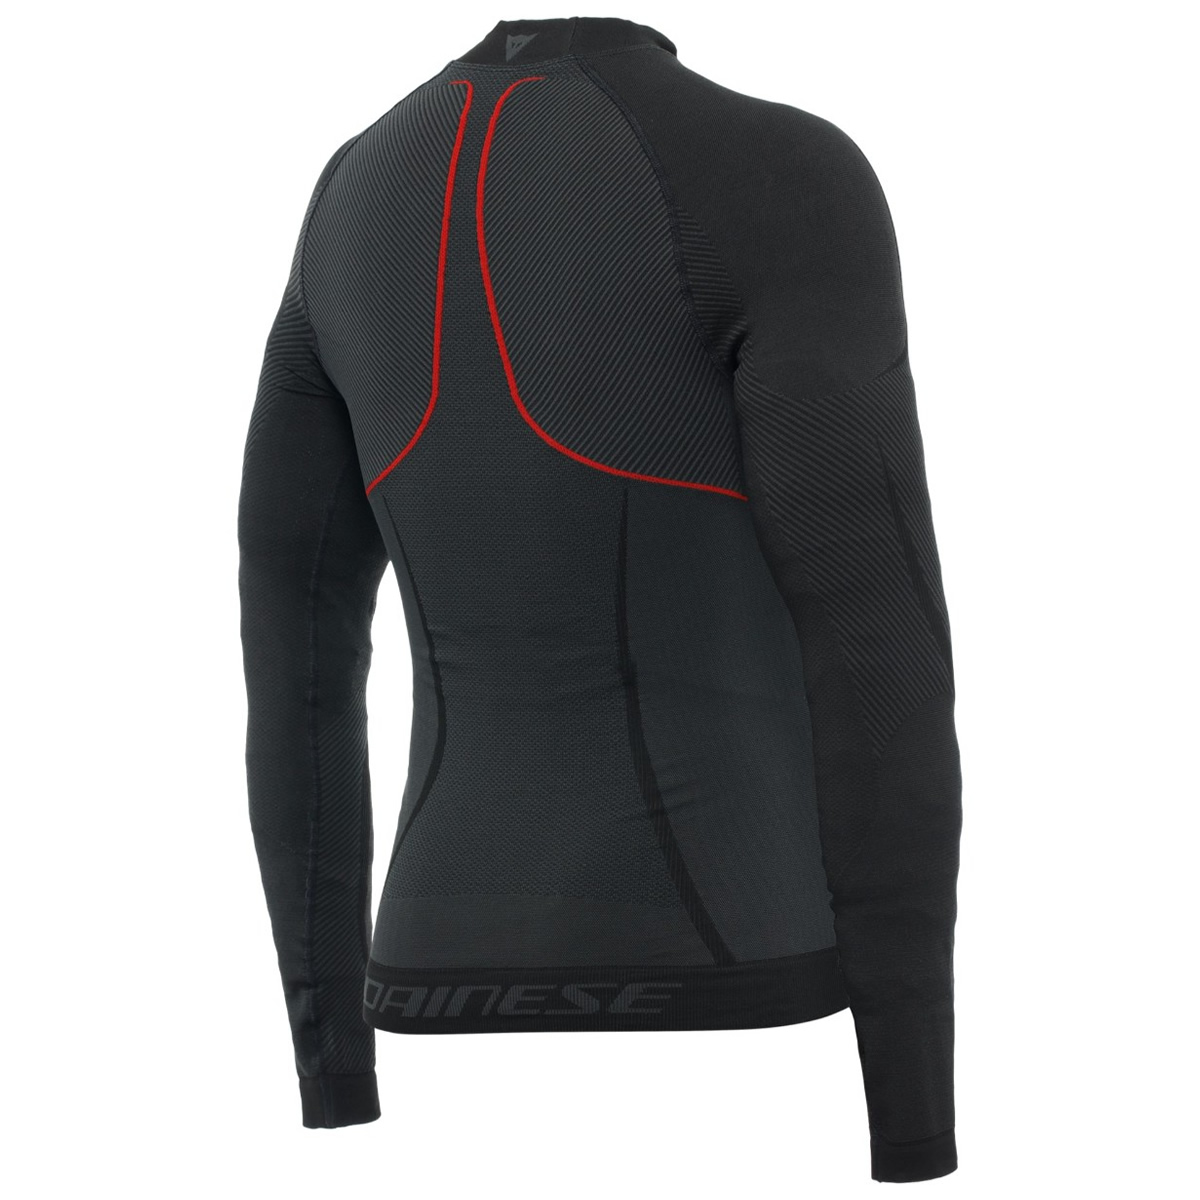 Dainese Funktionsshirt Thermo LS, schwarz-rot